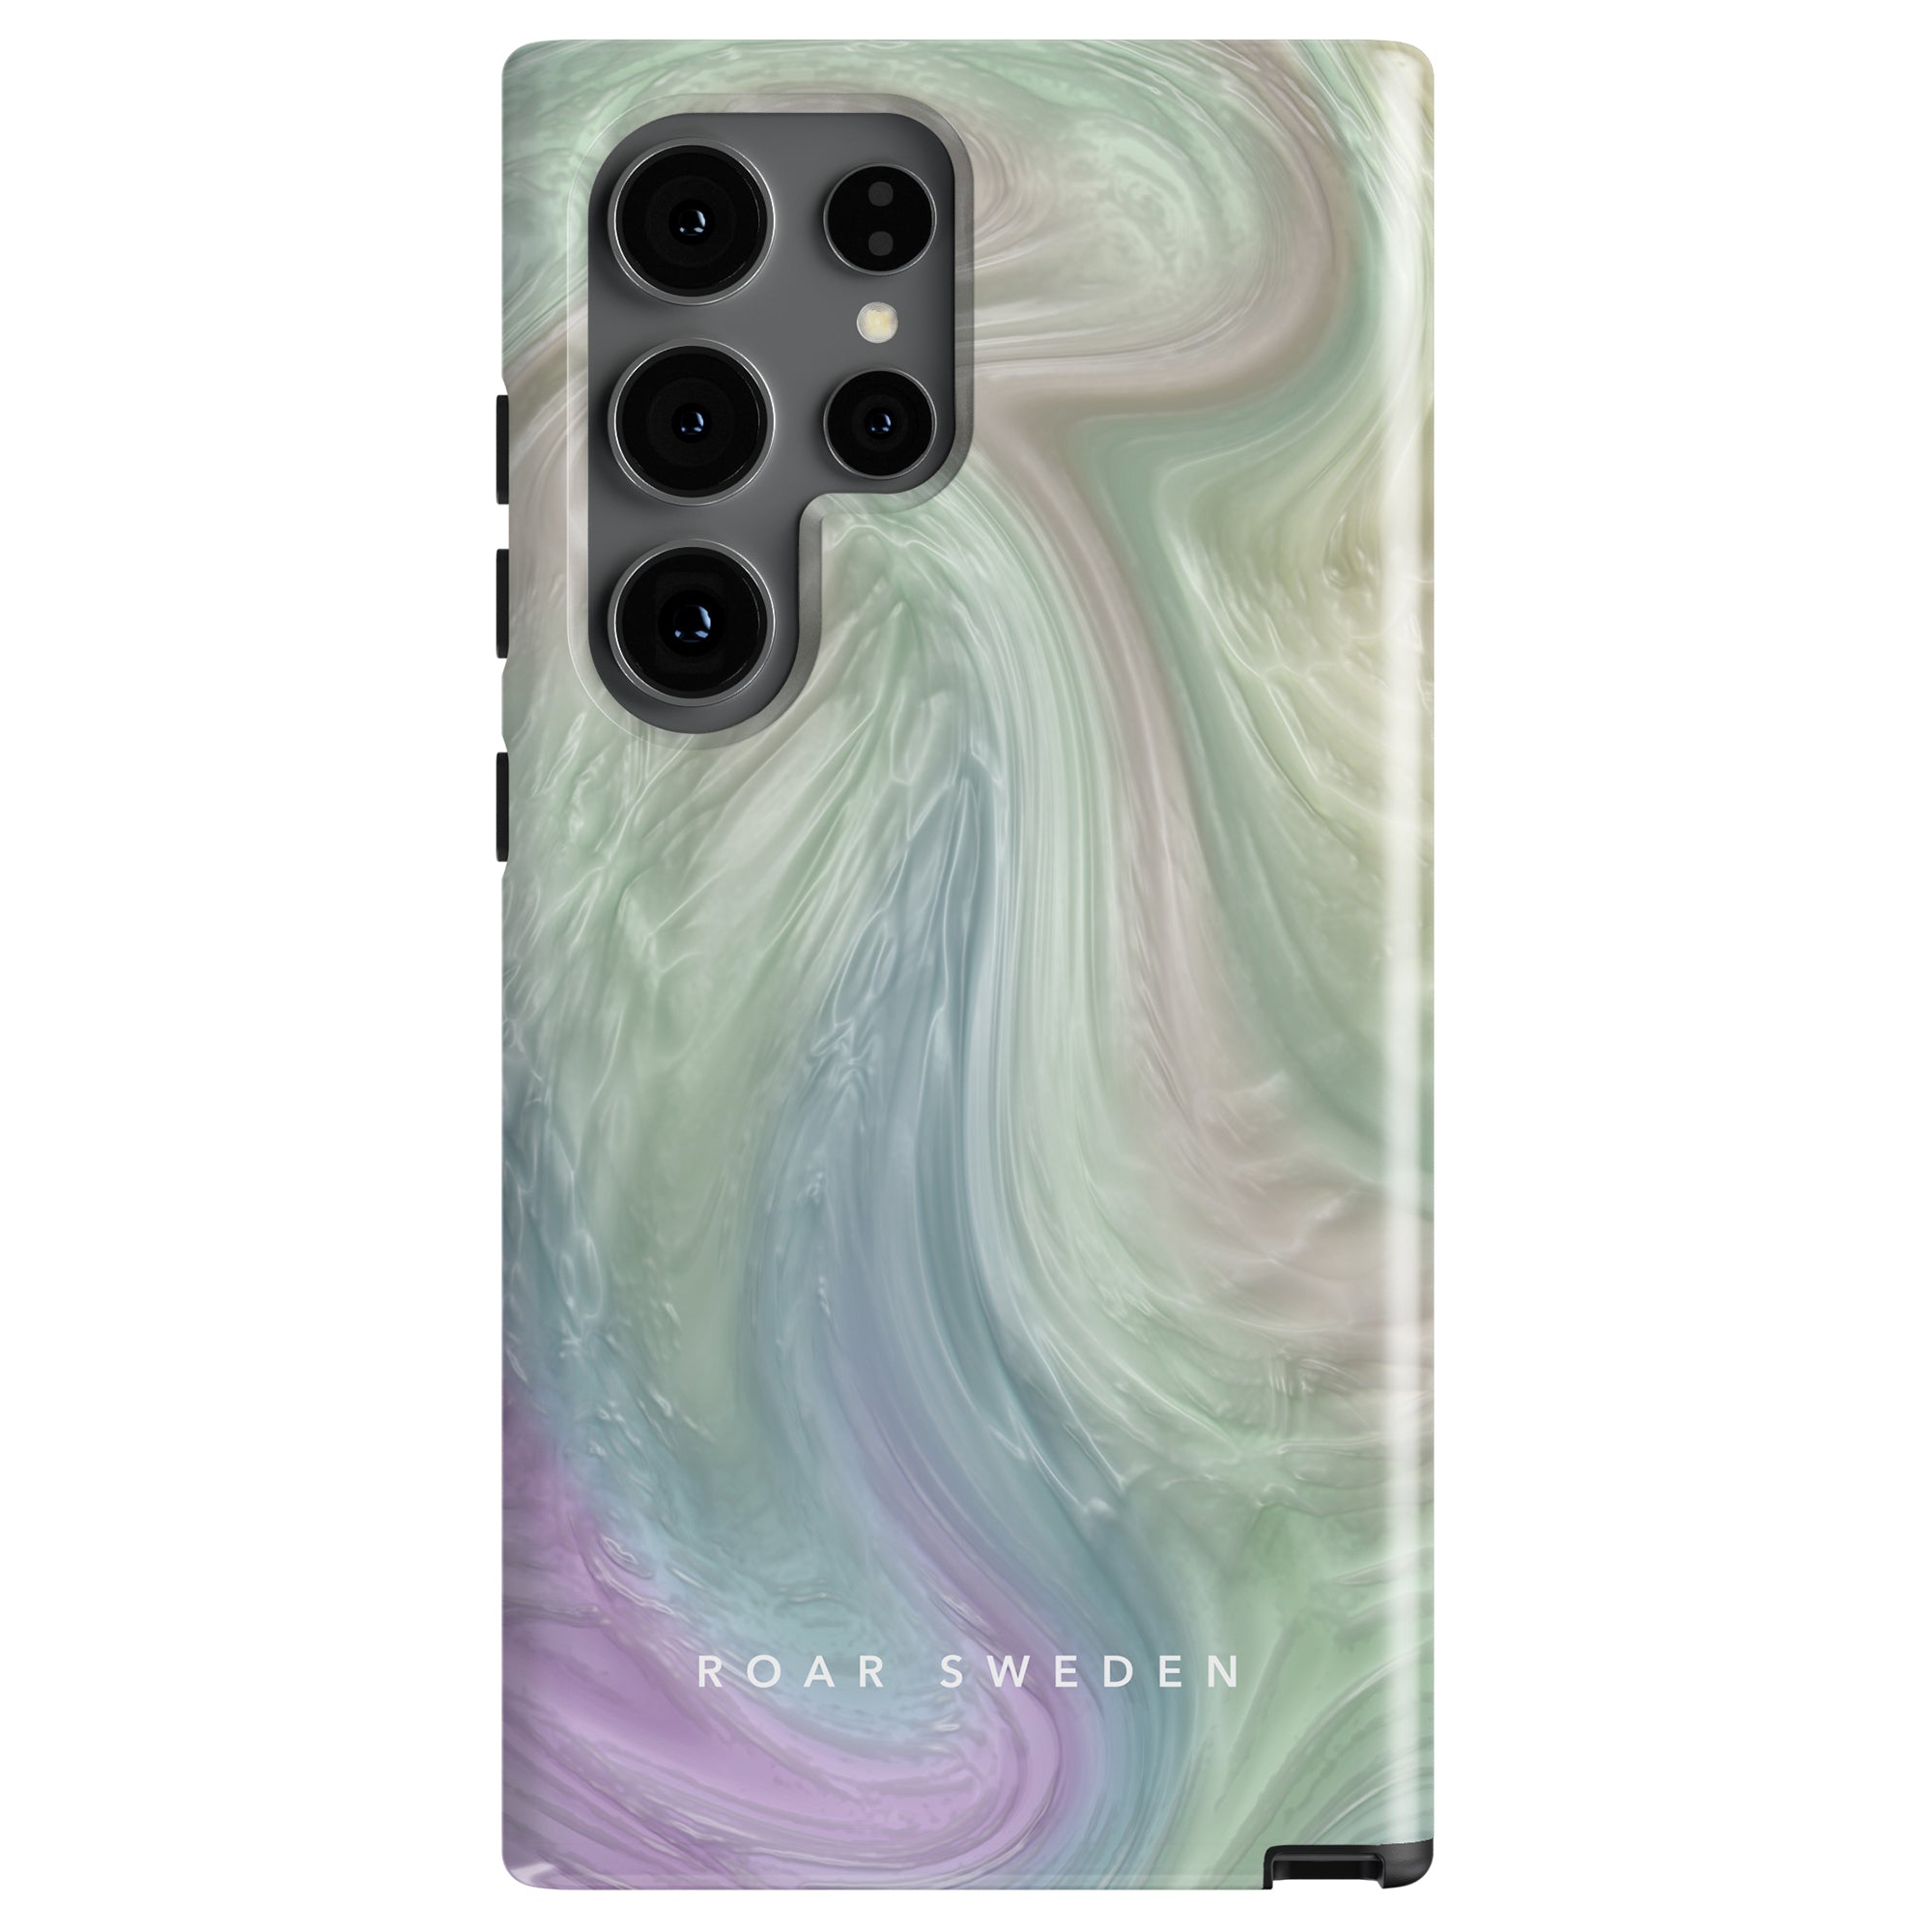 A Nacre - Tough Case with a marbled green, blue, and purple design and labeled "roar sweden", featuring cutouts for camera lenses.